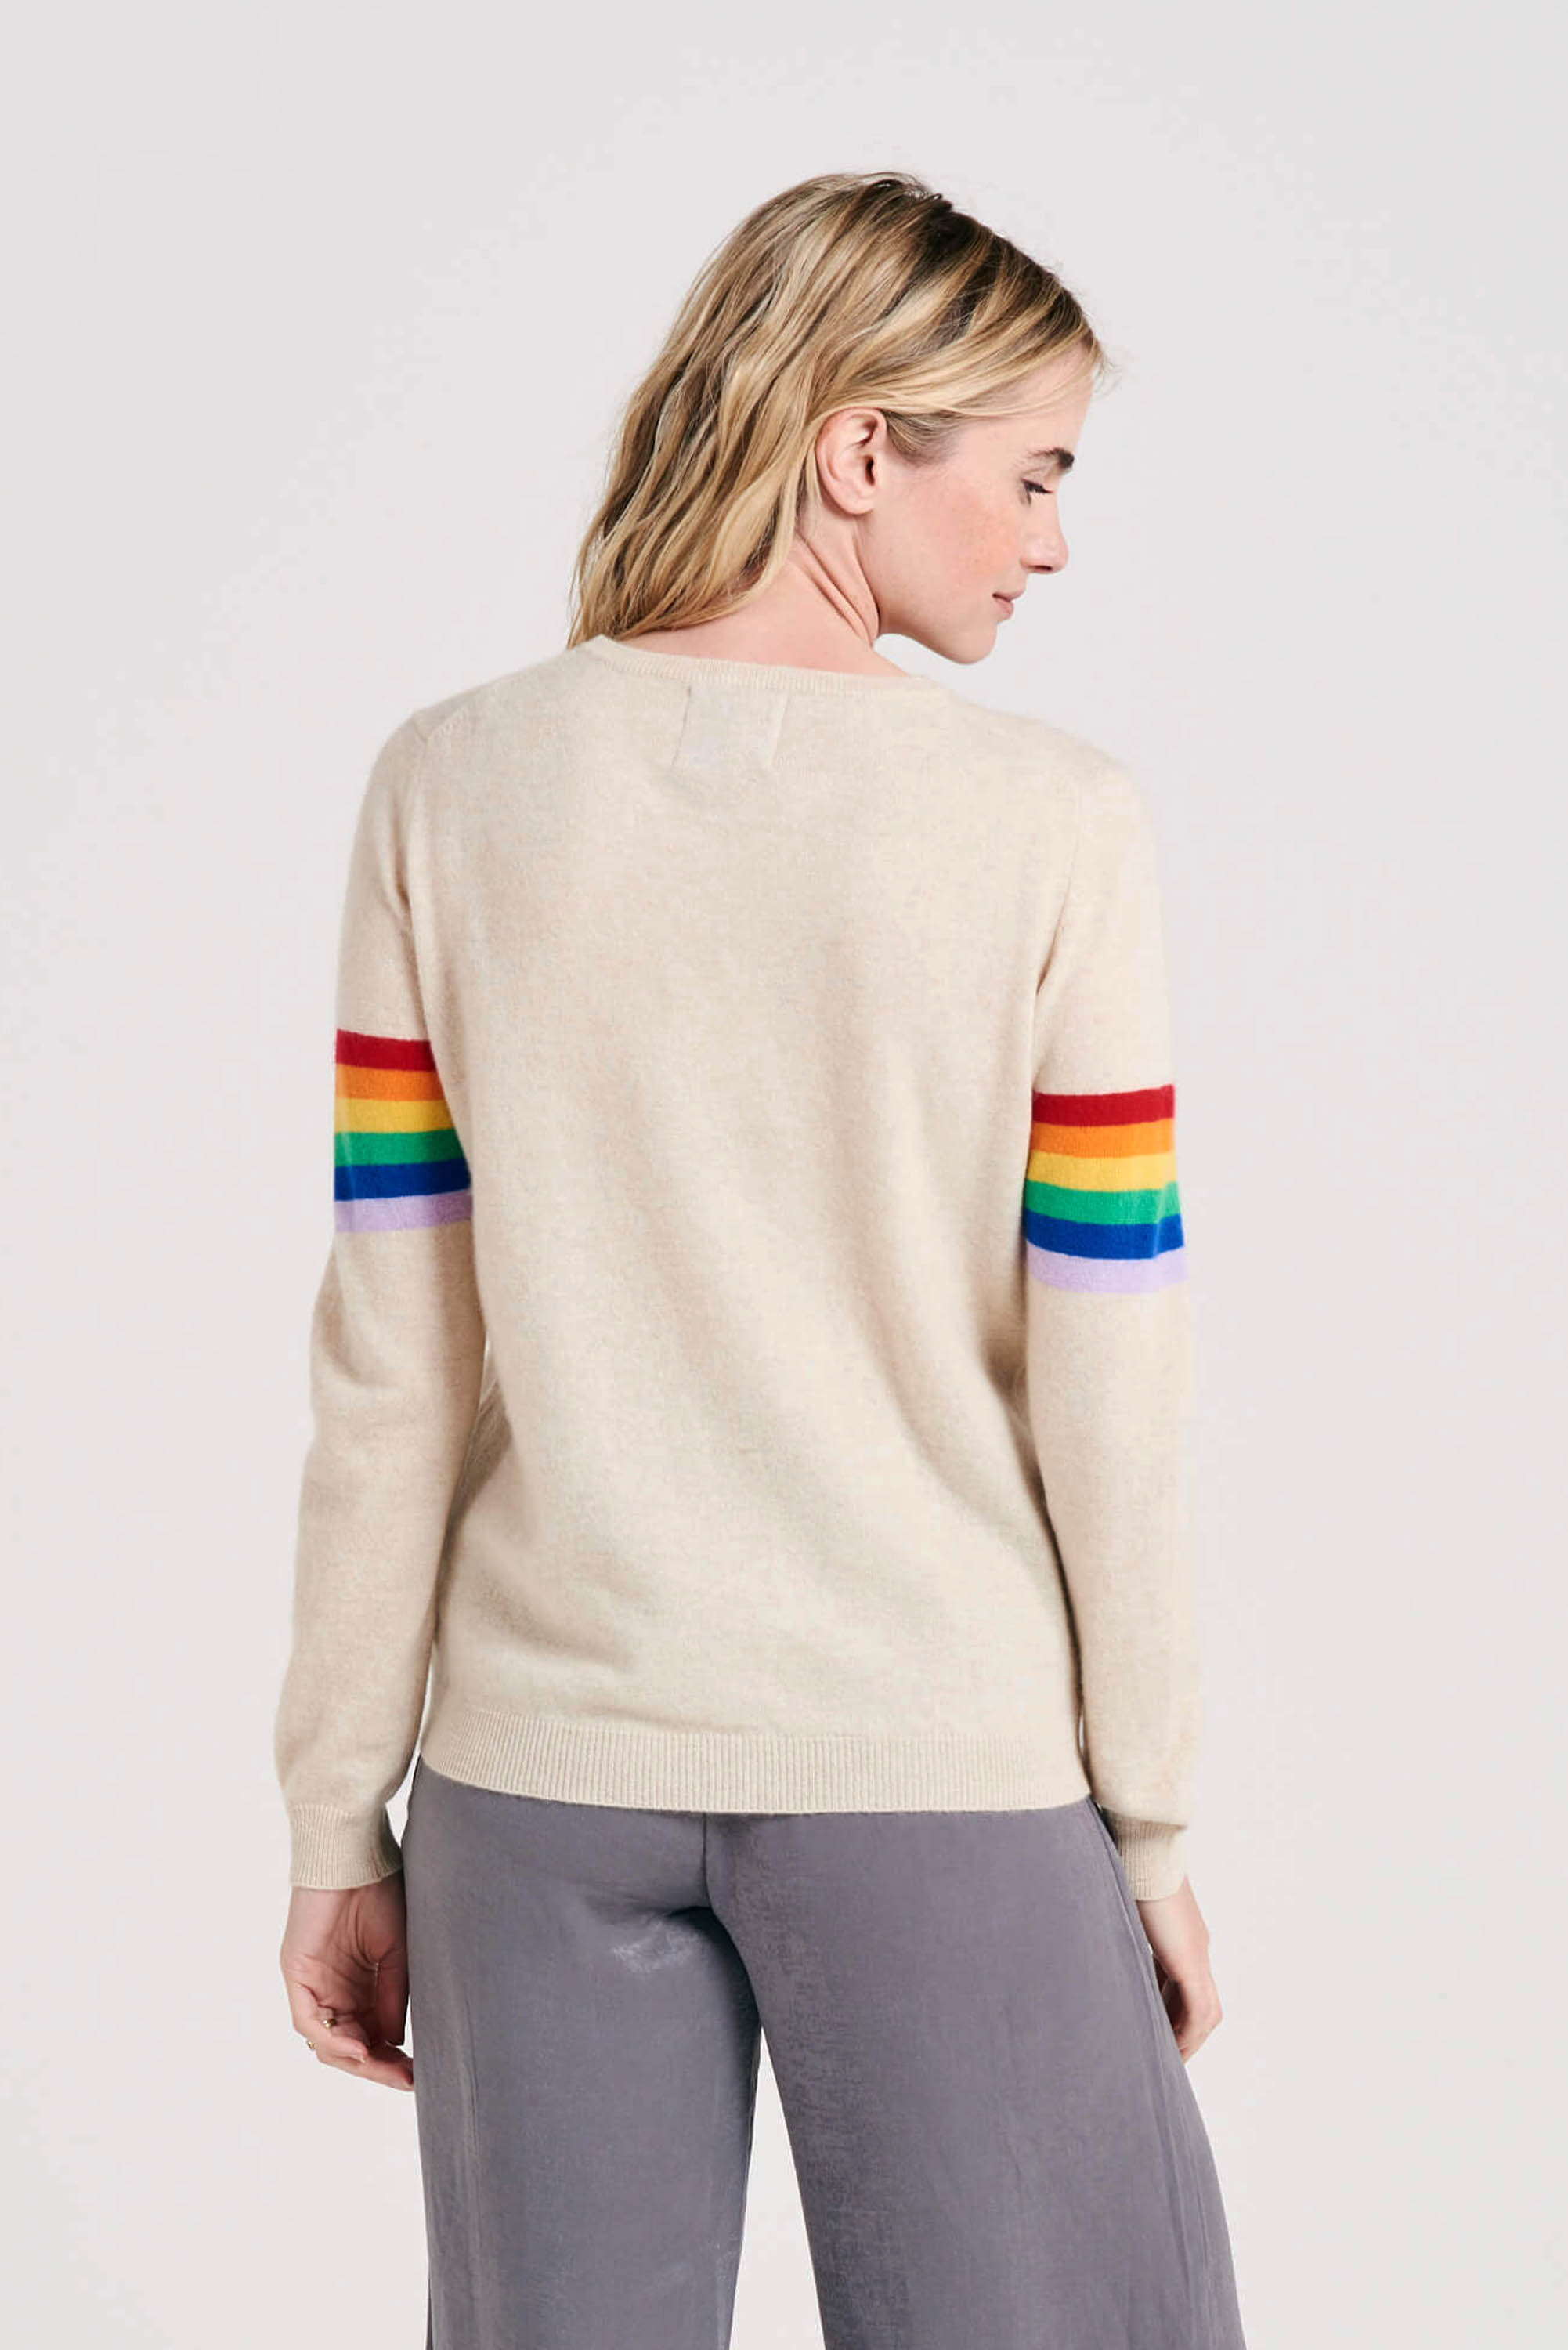 Blonde female model wearing Jumper1234 Rainbow arms cashmere crew in oatmeal facing away from the camera